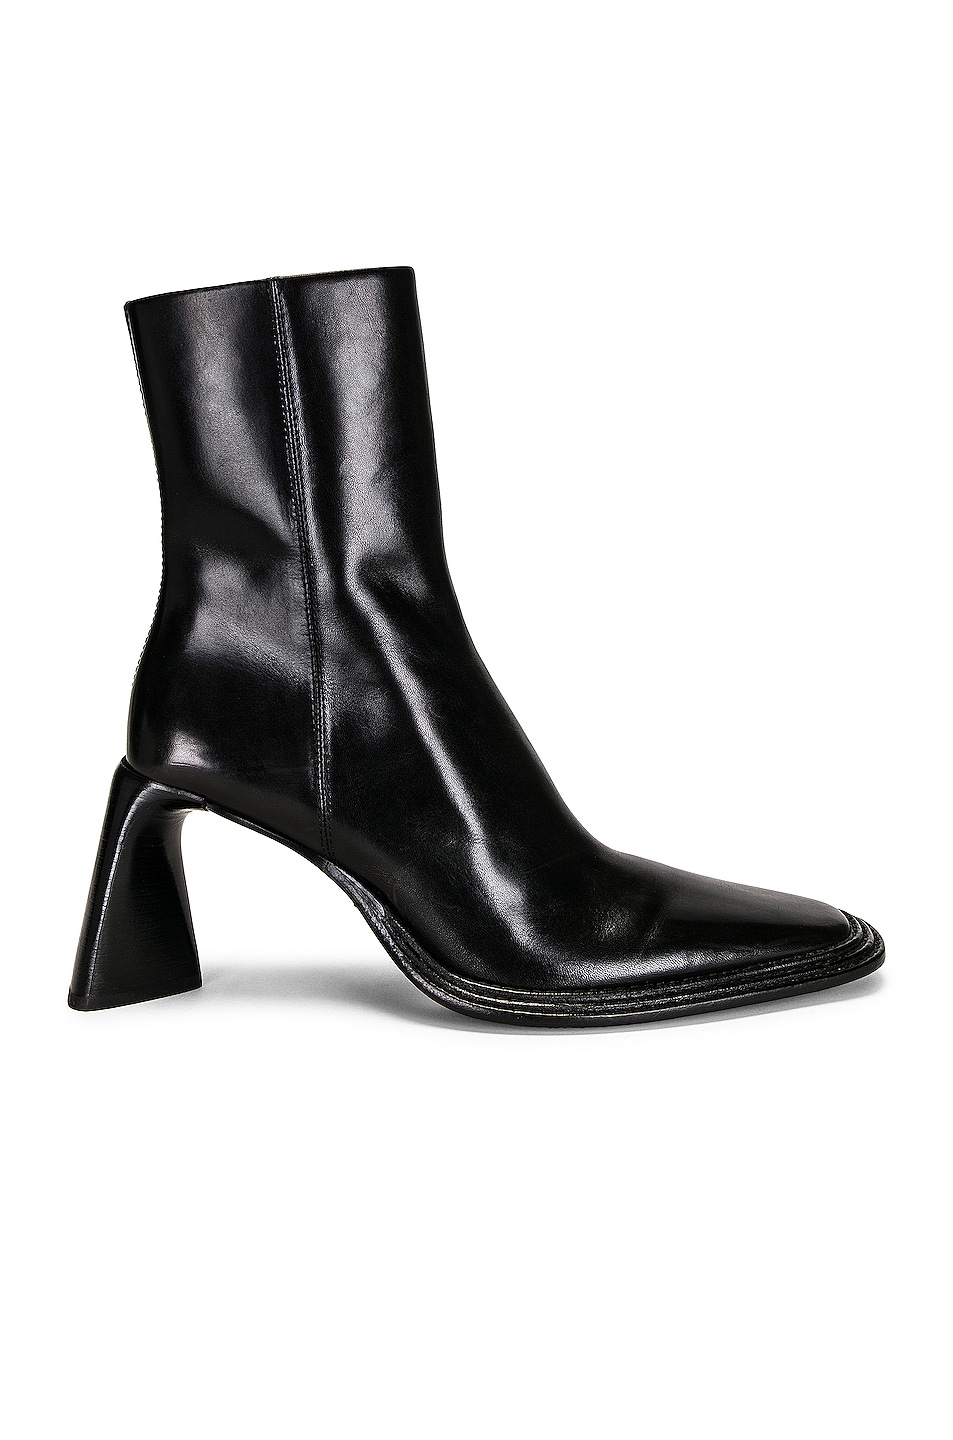 Image 1 of Alexander Wang Booker 85 Ankle Boot in Black